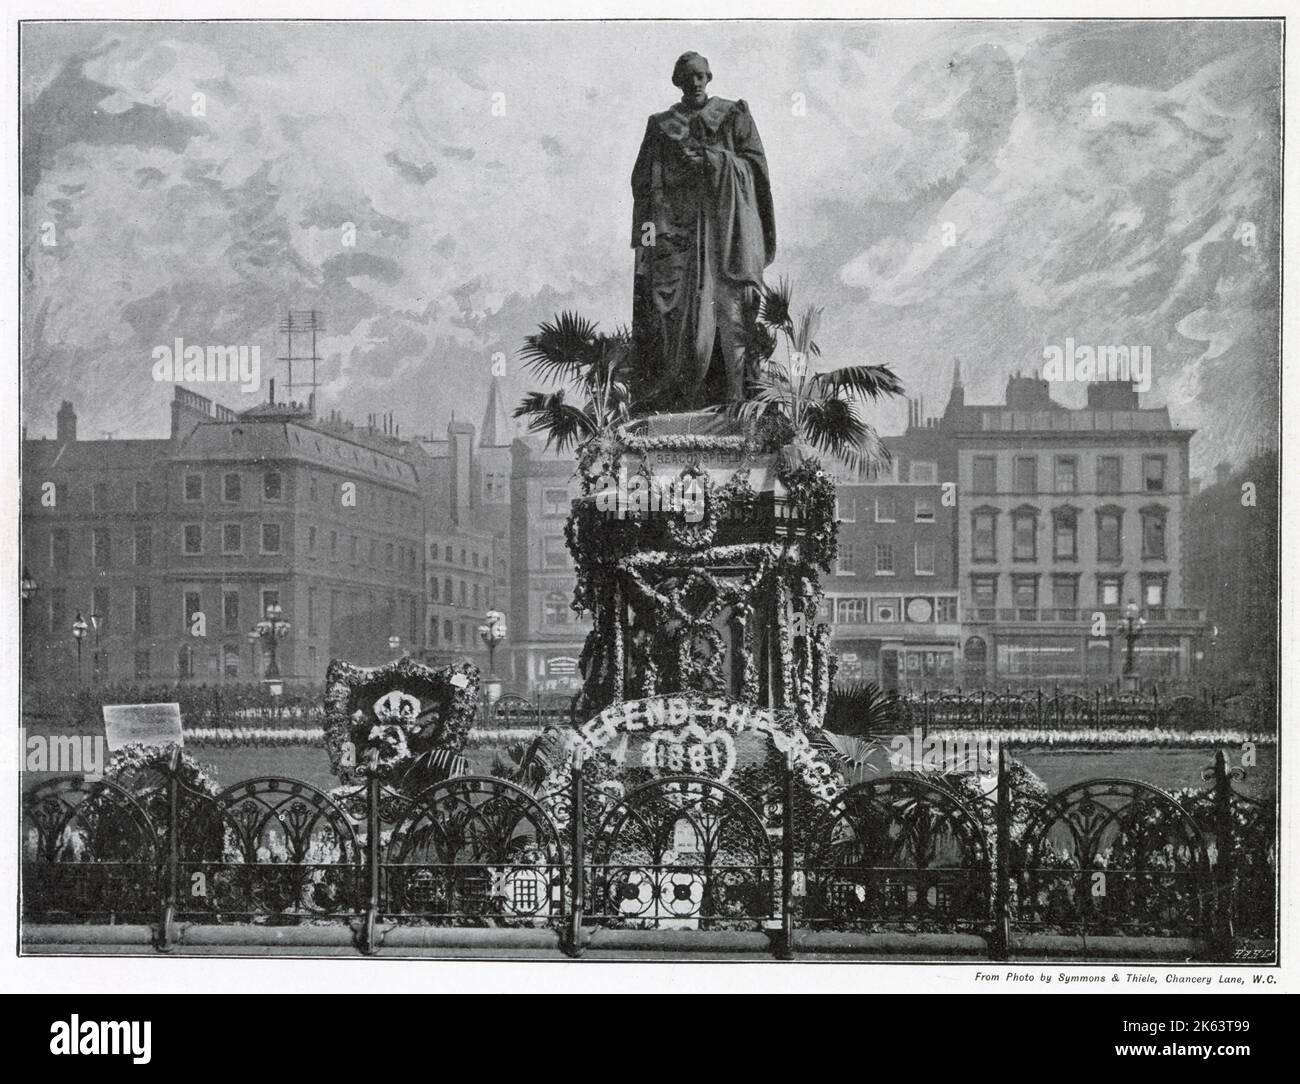 Lord Beaconsfield's bronze statue, facing St. Margaret's Church,  in Parliament Square, London on Primrose Day. On the anniversary of the death of British statesman and prime minister Benjamin Disraeli, 1st Earl of Beaconsfield, on 19 April 1881. The primrose was his favourite flower and Queen Victoria would often send him bunches of them from Windsor and Osborne House. Stock Photo